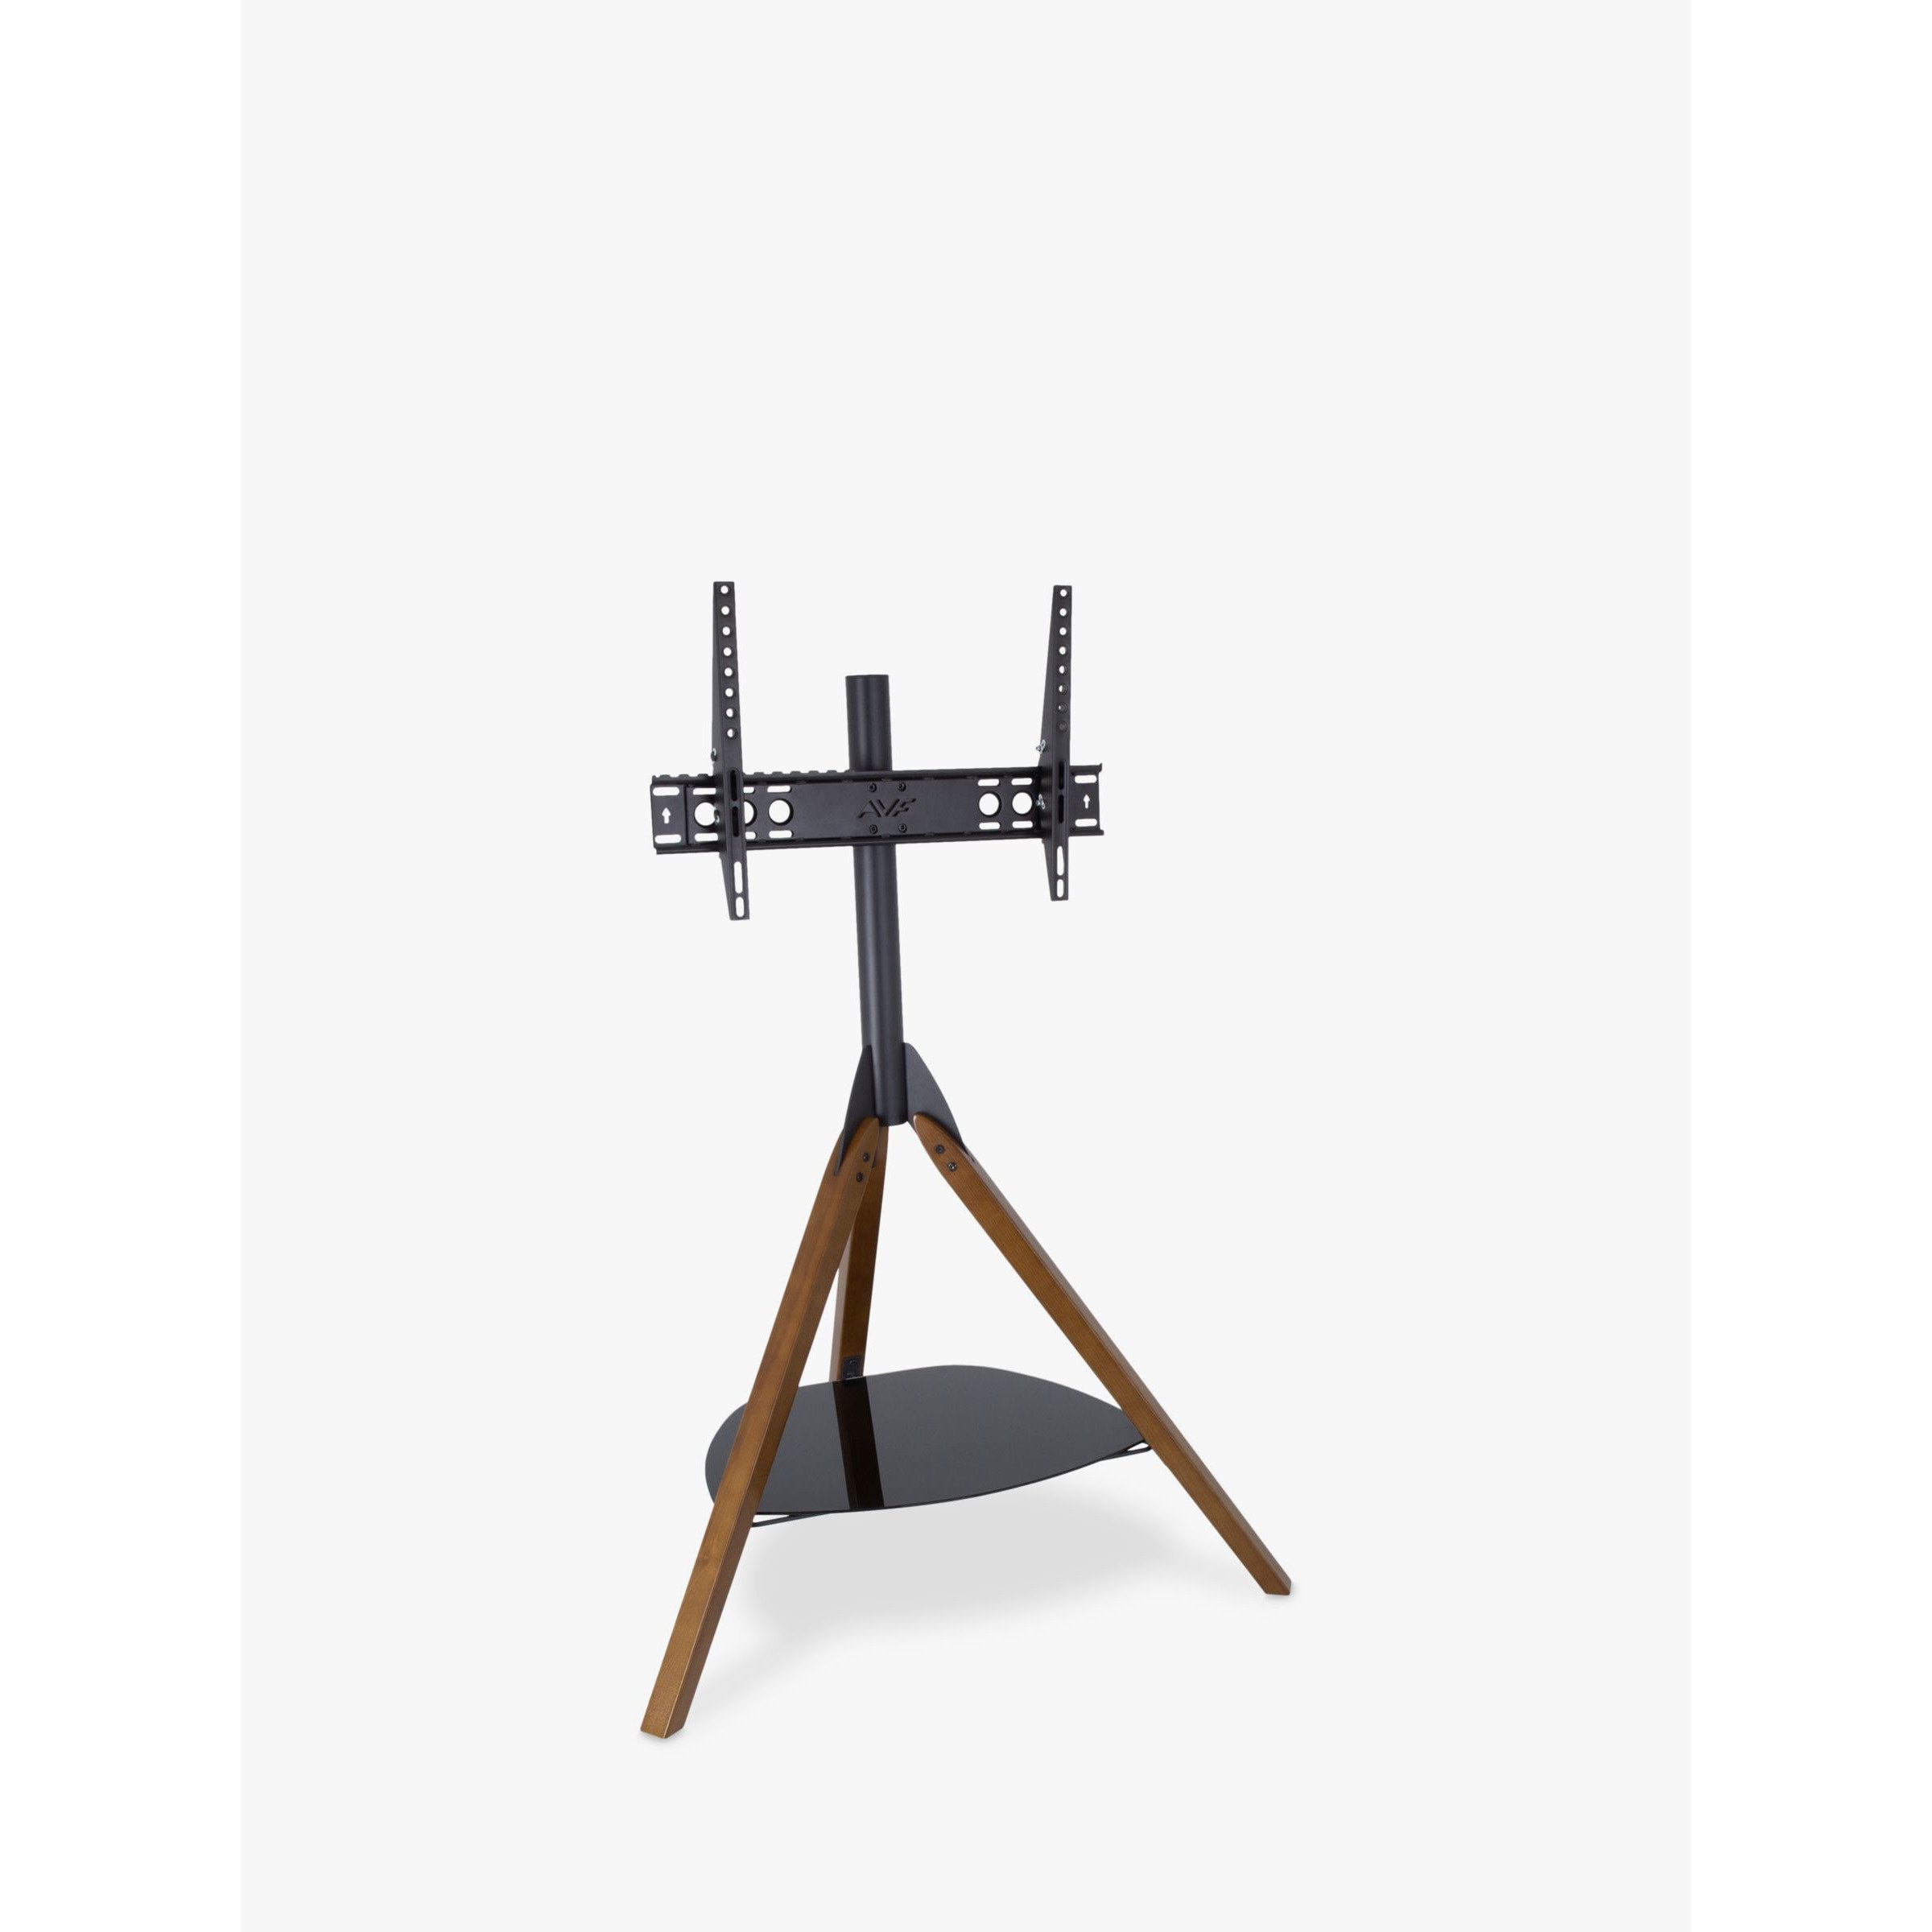 "AVF Hoxton Tripod TV Stand with Mount for TVs from 32"" to 70""" - image 1